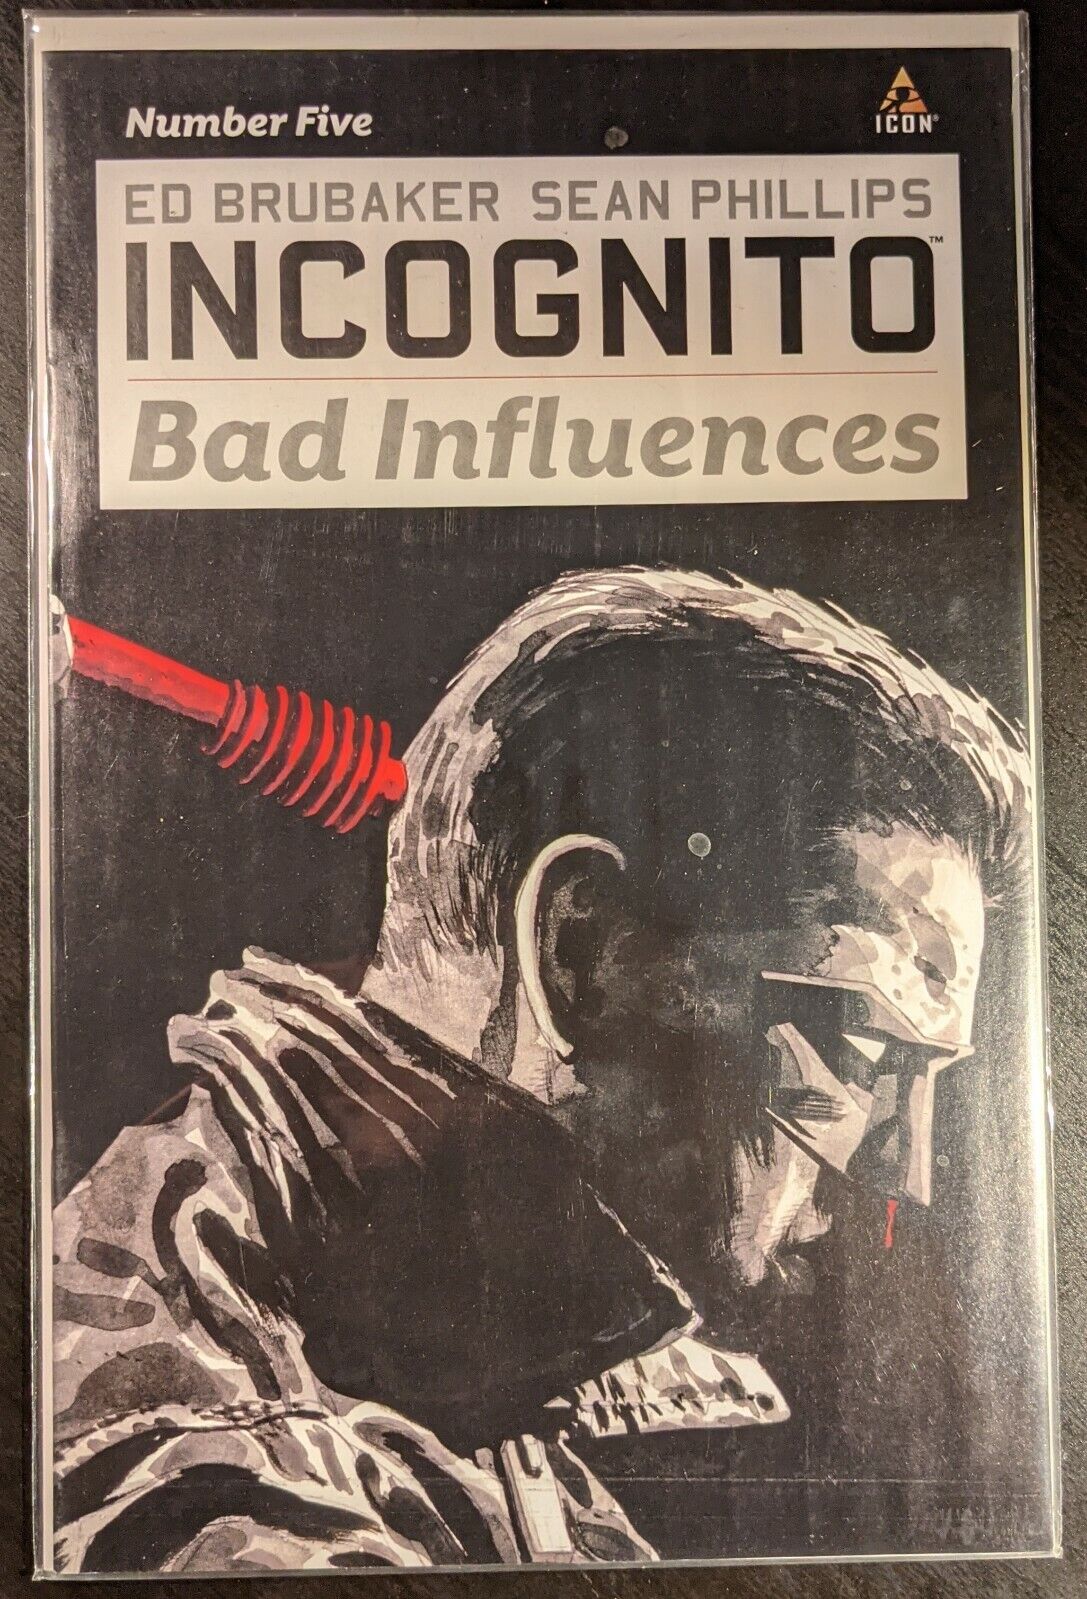 Incognito Bad Influences #5 Icon Comics April 2011 First Printing